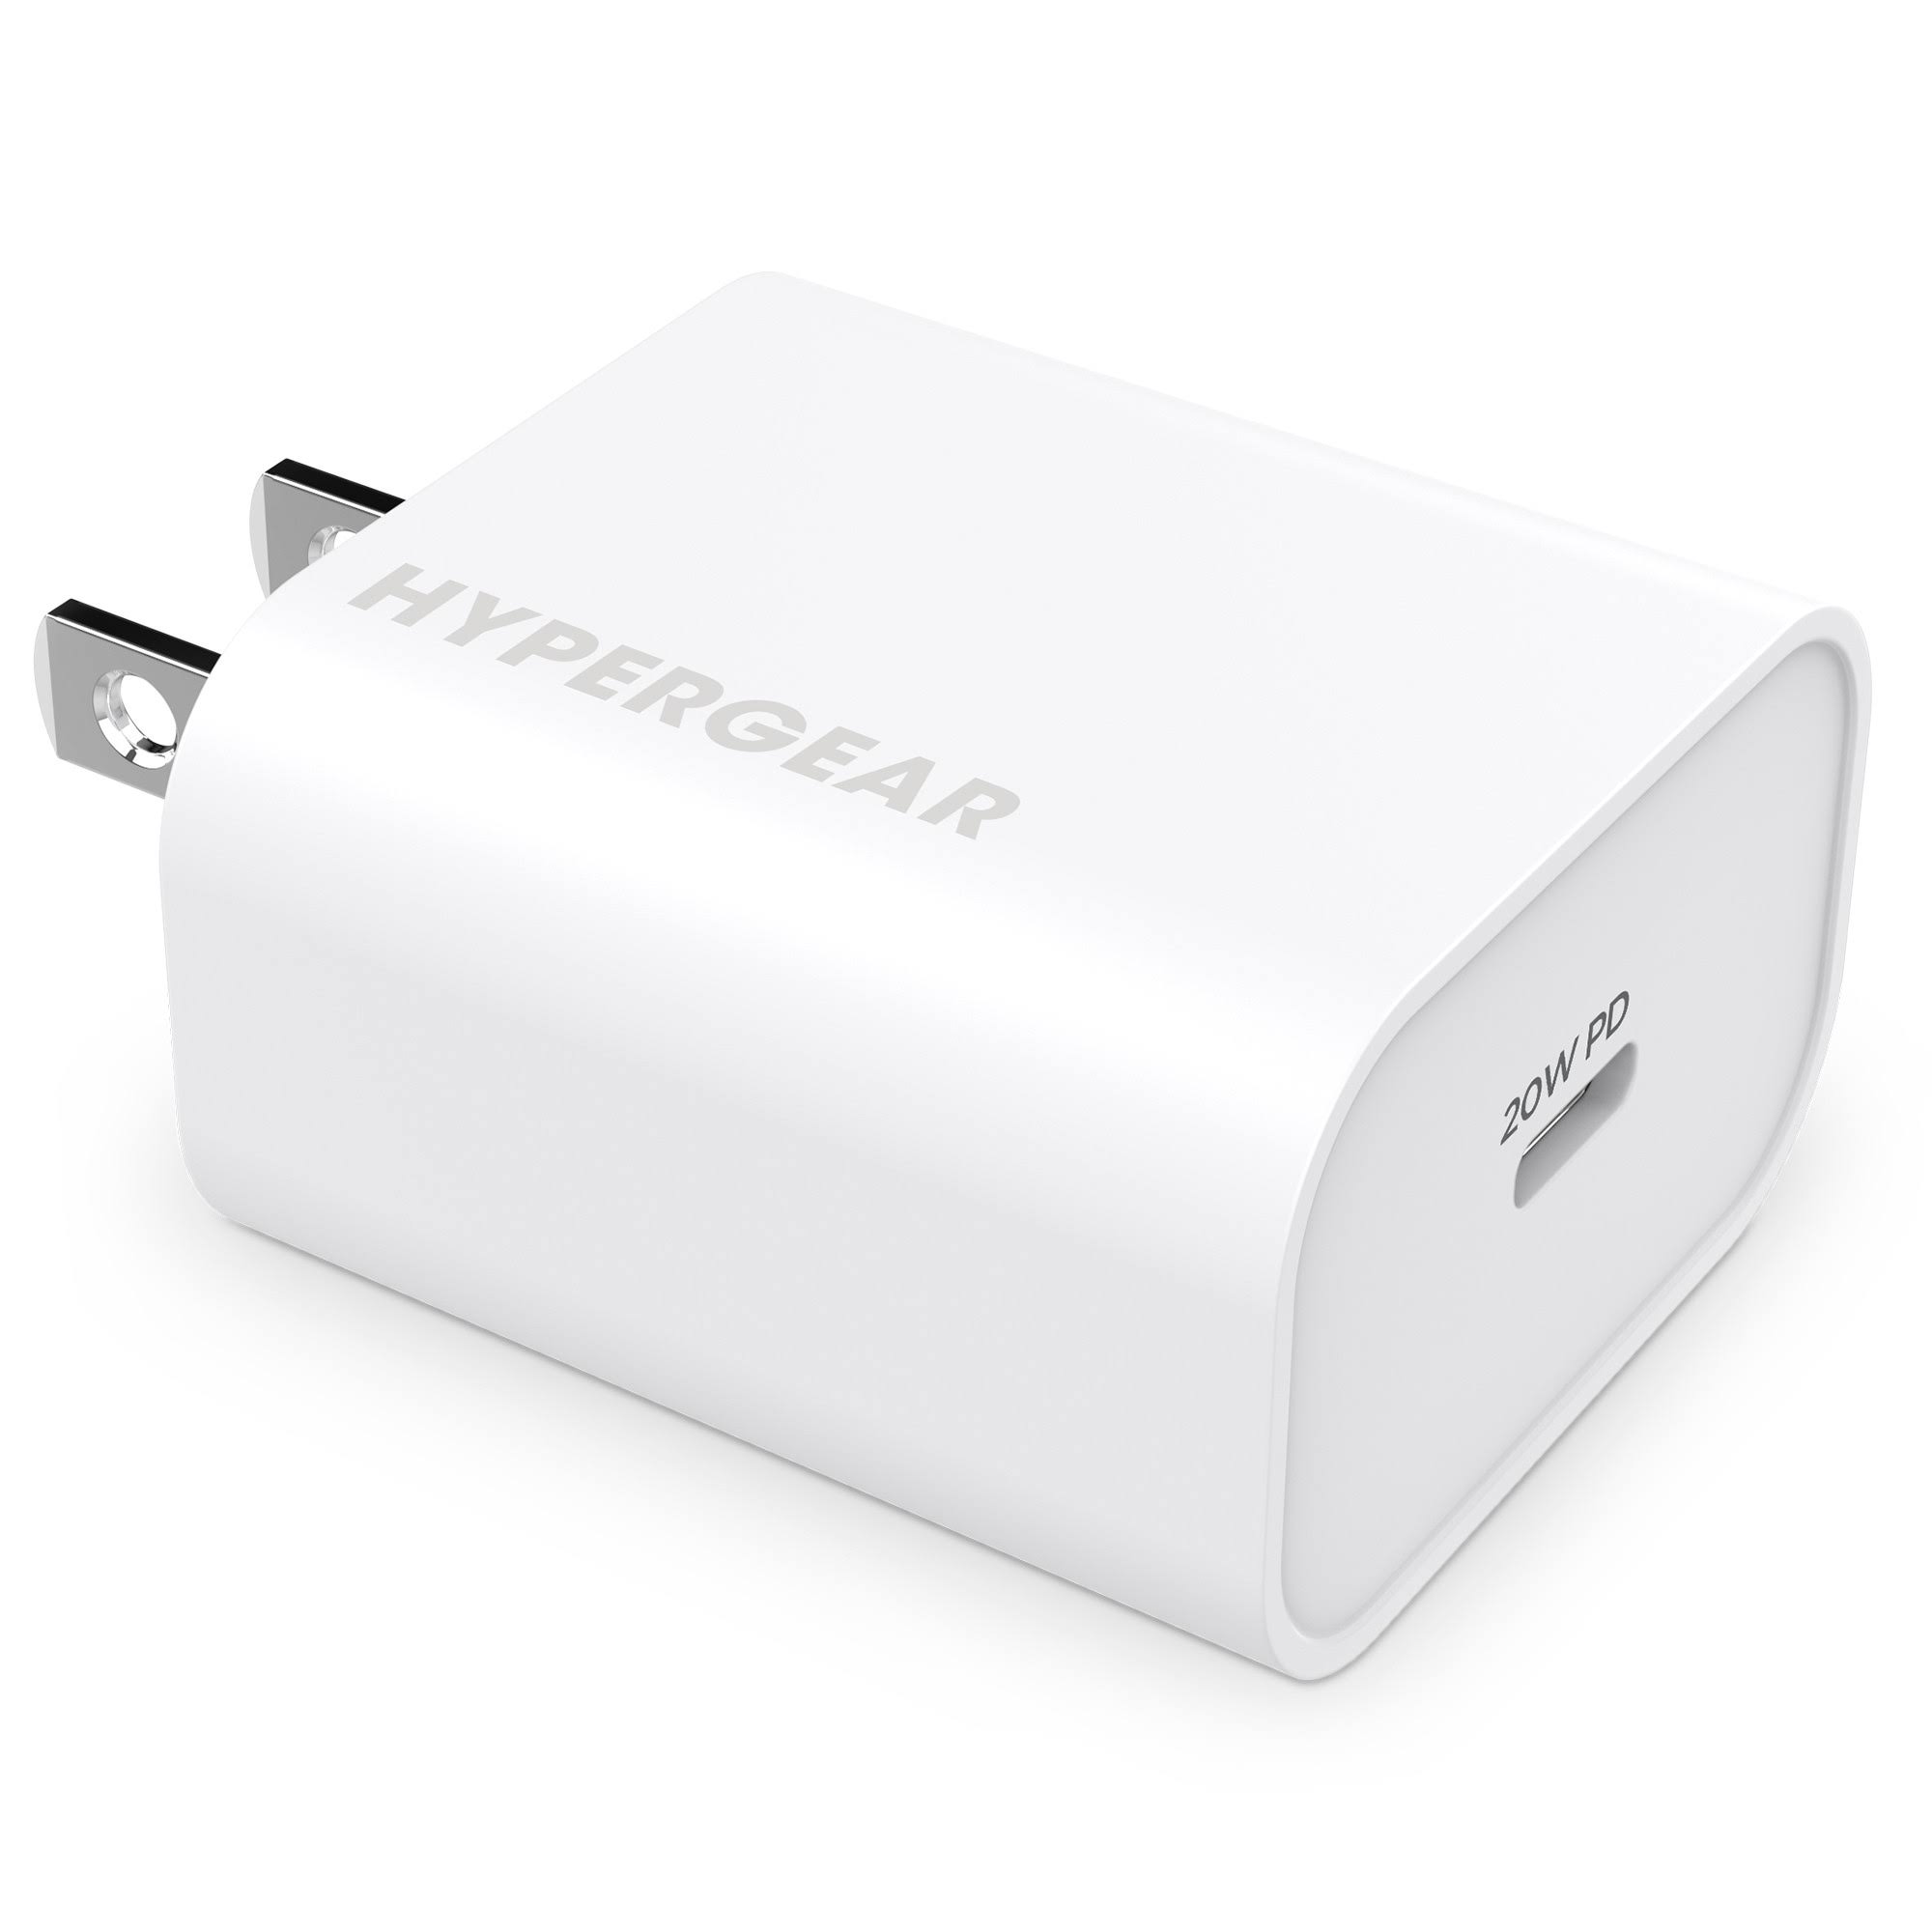 HyperGear 20W White USB-C Wall Charger